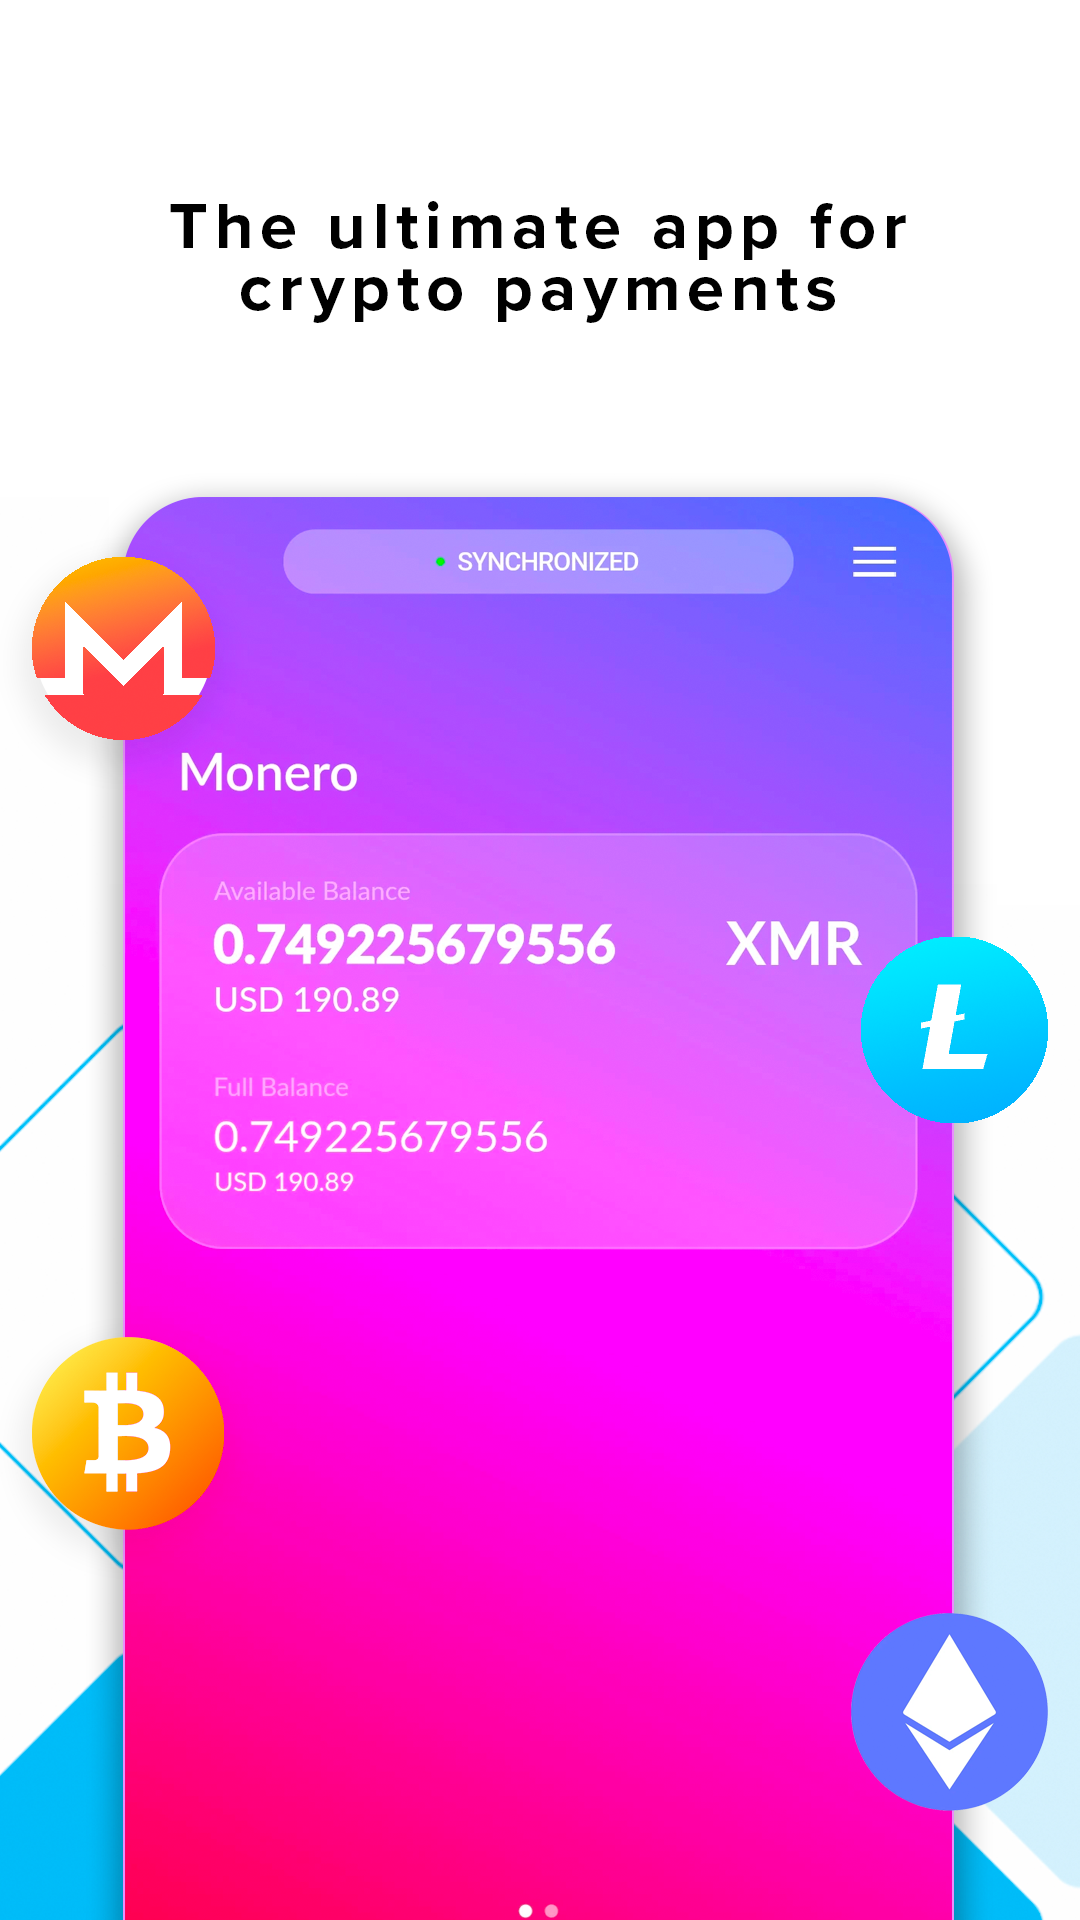 The ultimate app for crypto payments